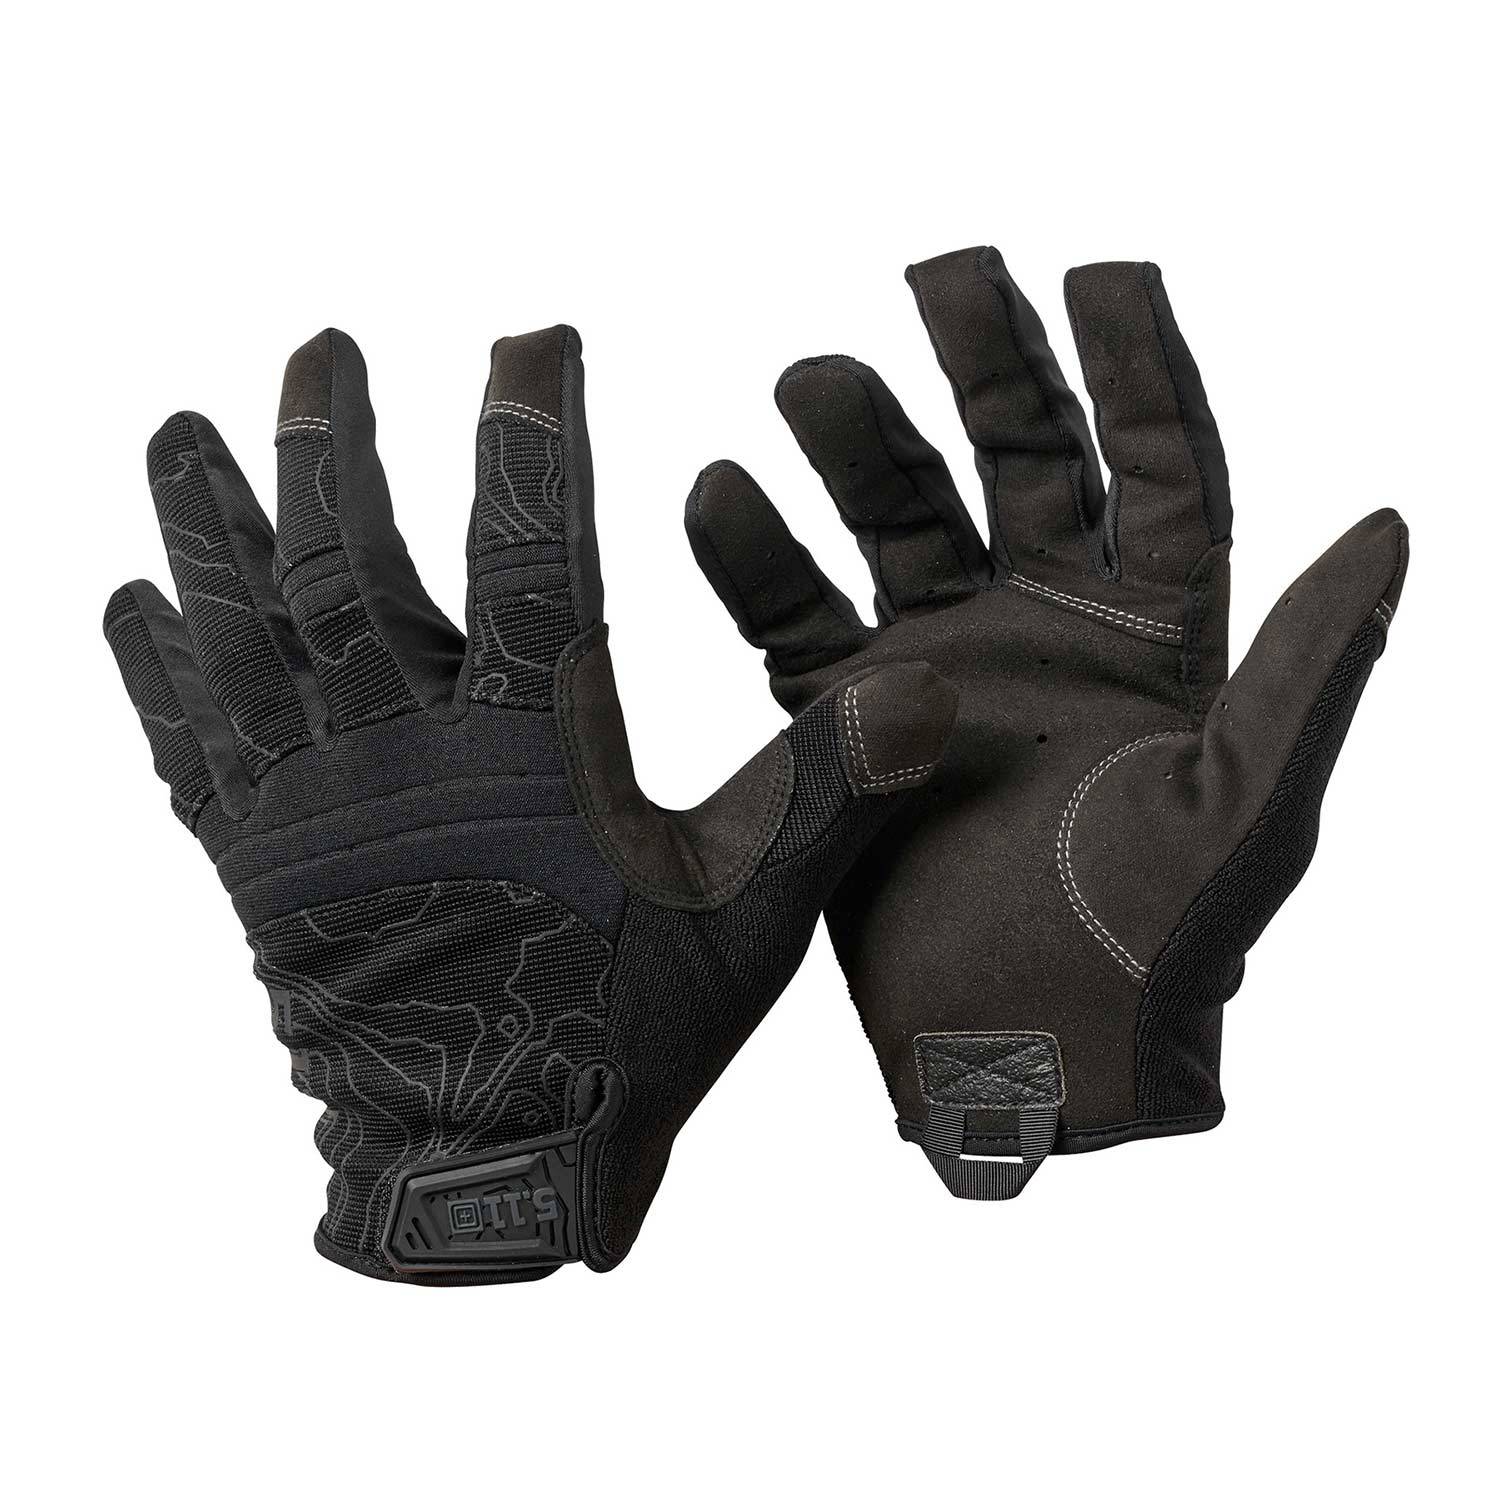 5.11 TACTICAL COMPETITION SHOOTING GLOVES